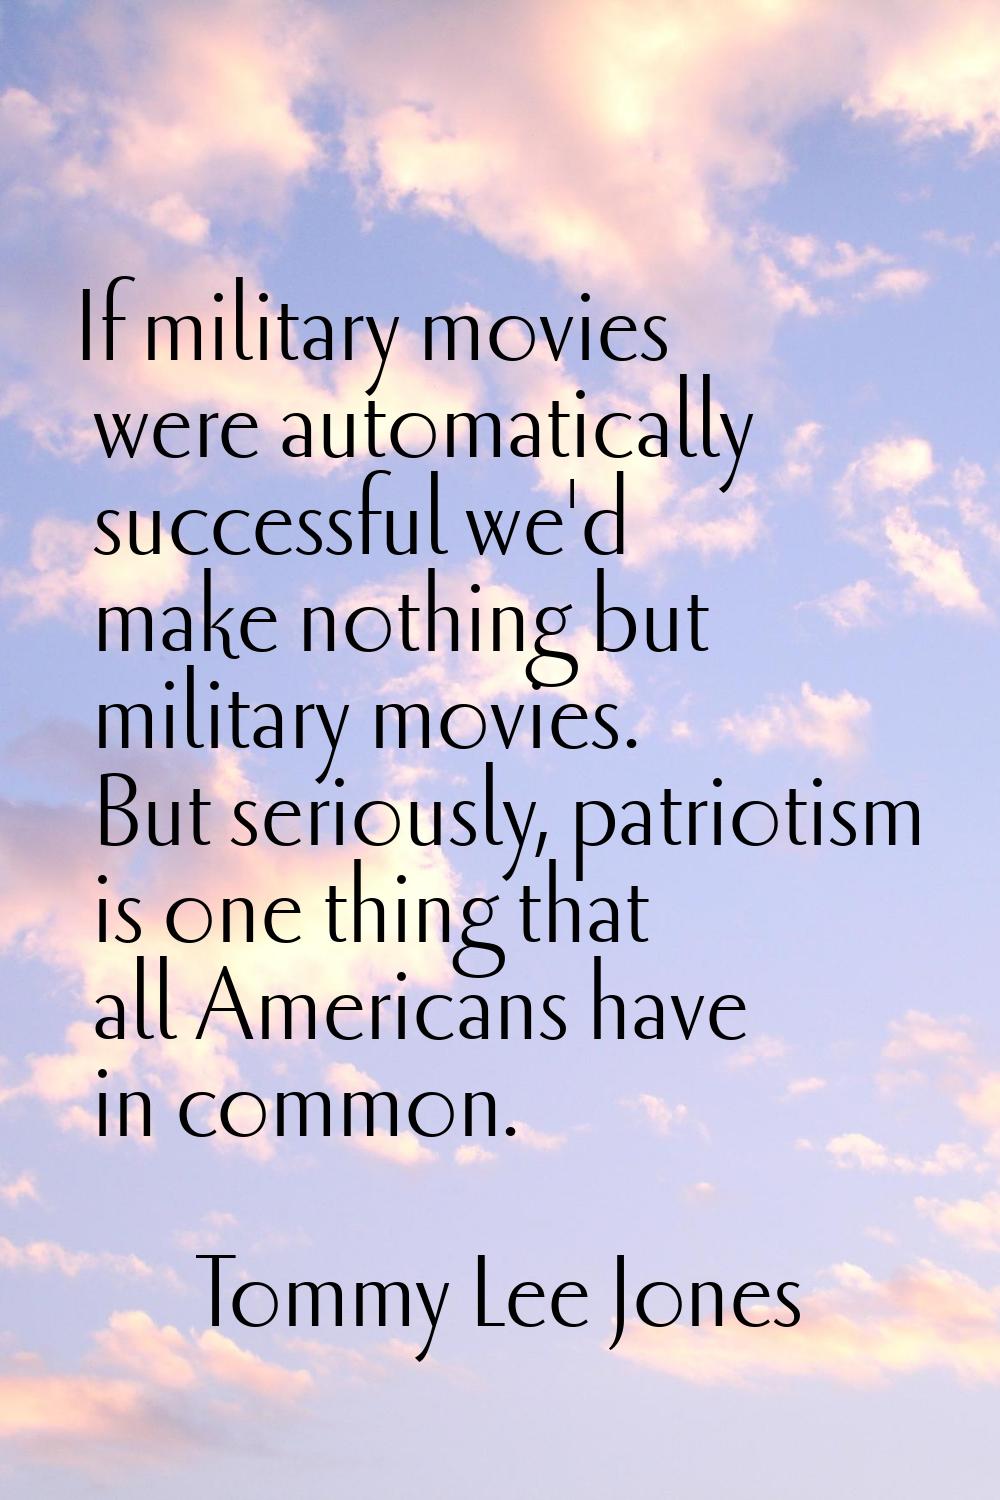 If military movies were automatically successful we'd make nothing but military movies. But serious